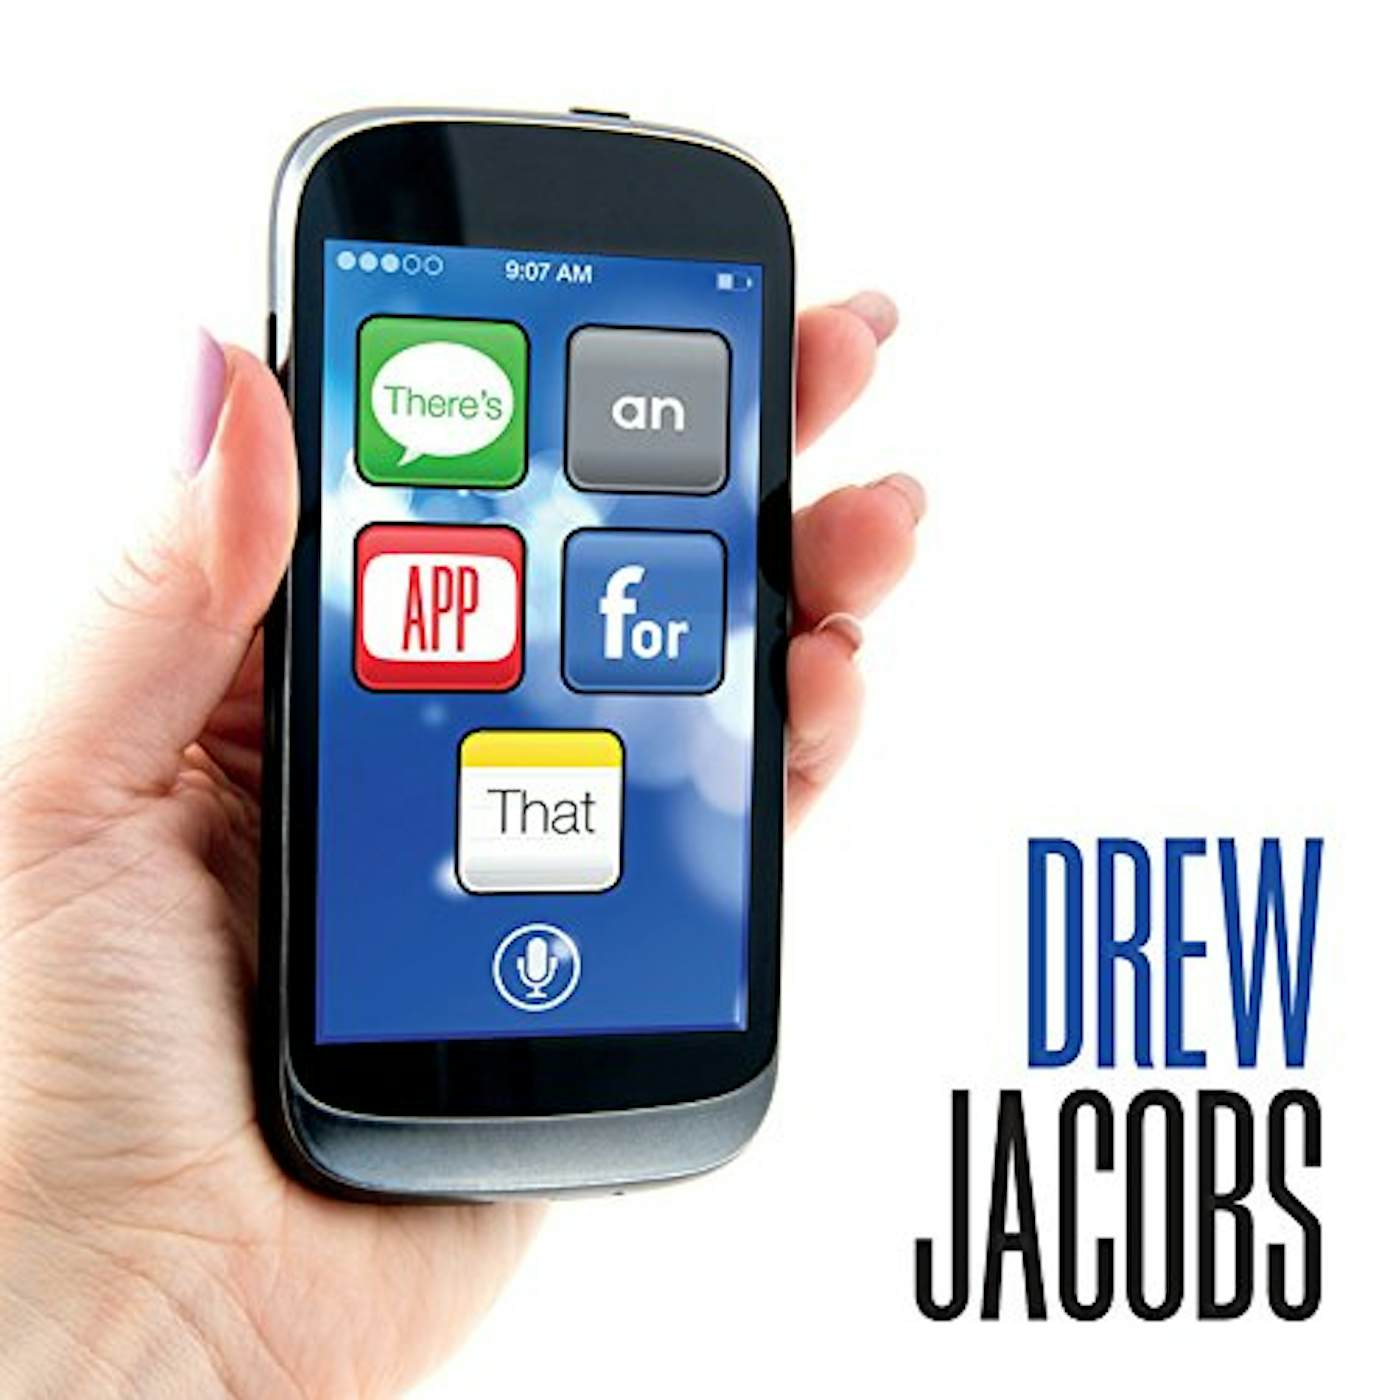 Drew Jacobs THERE'S AN APP FOR THAT CD